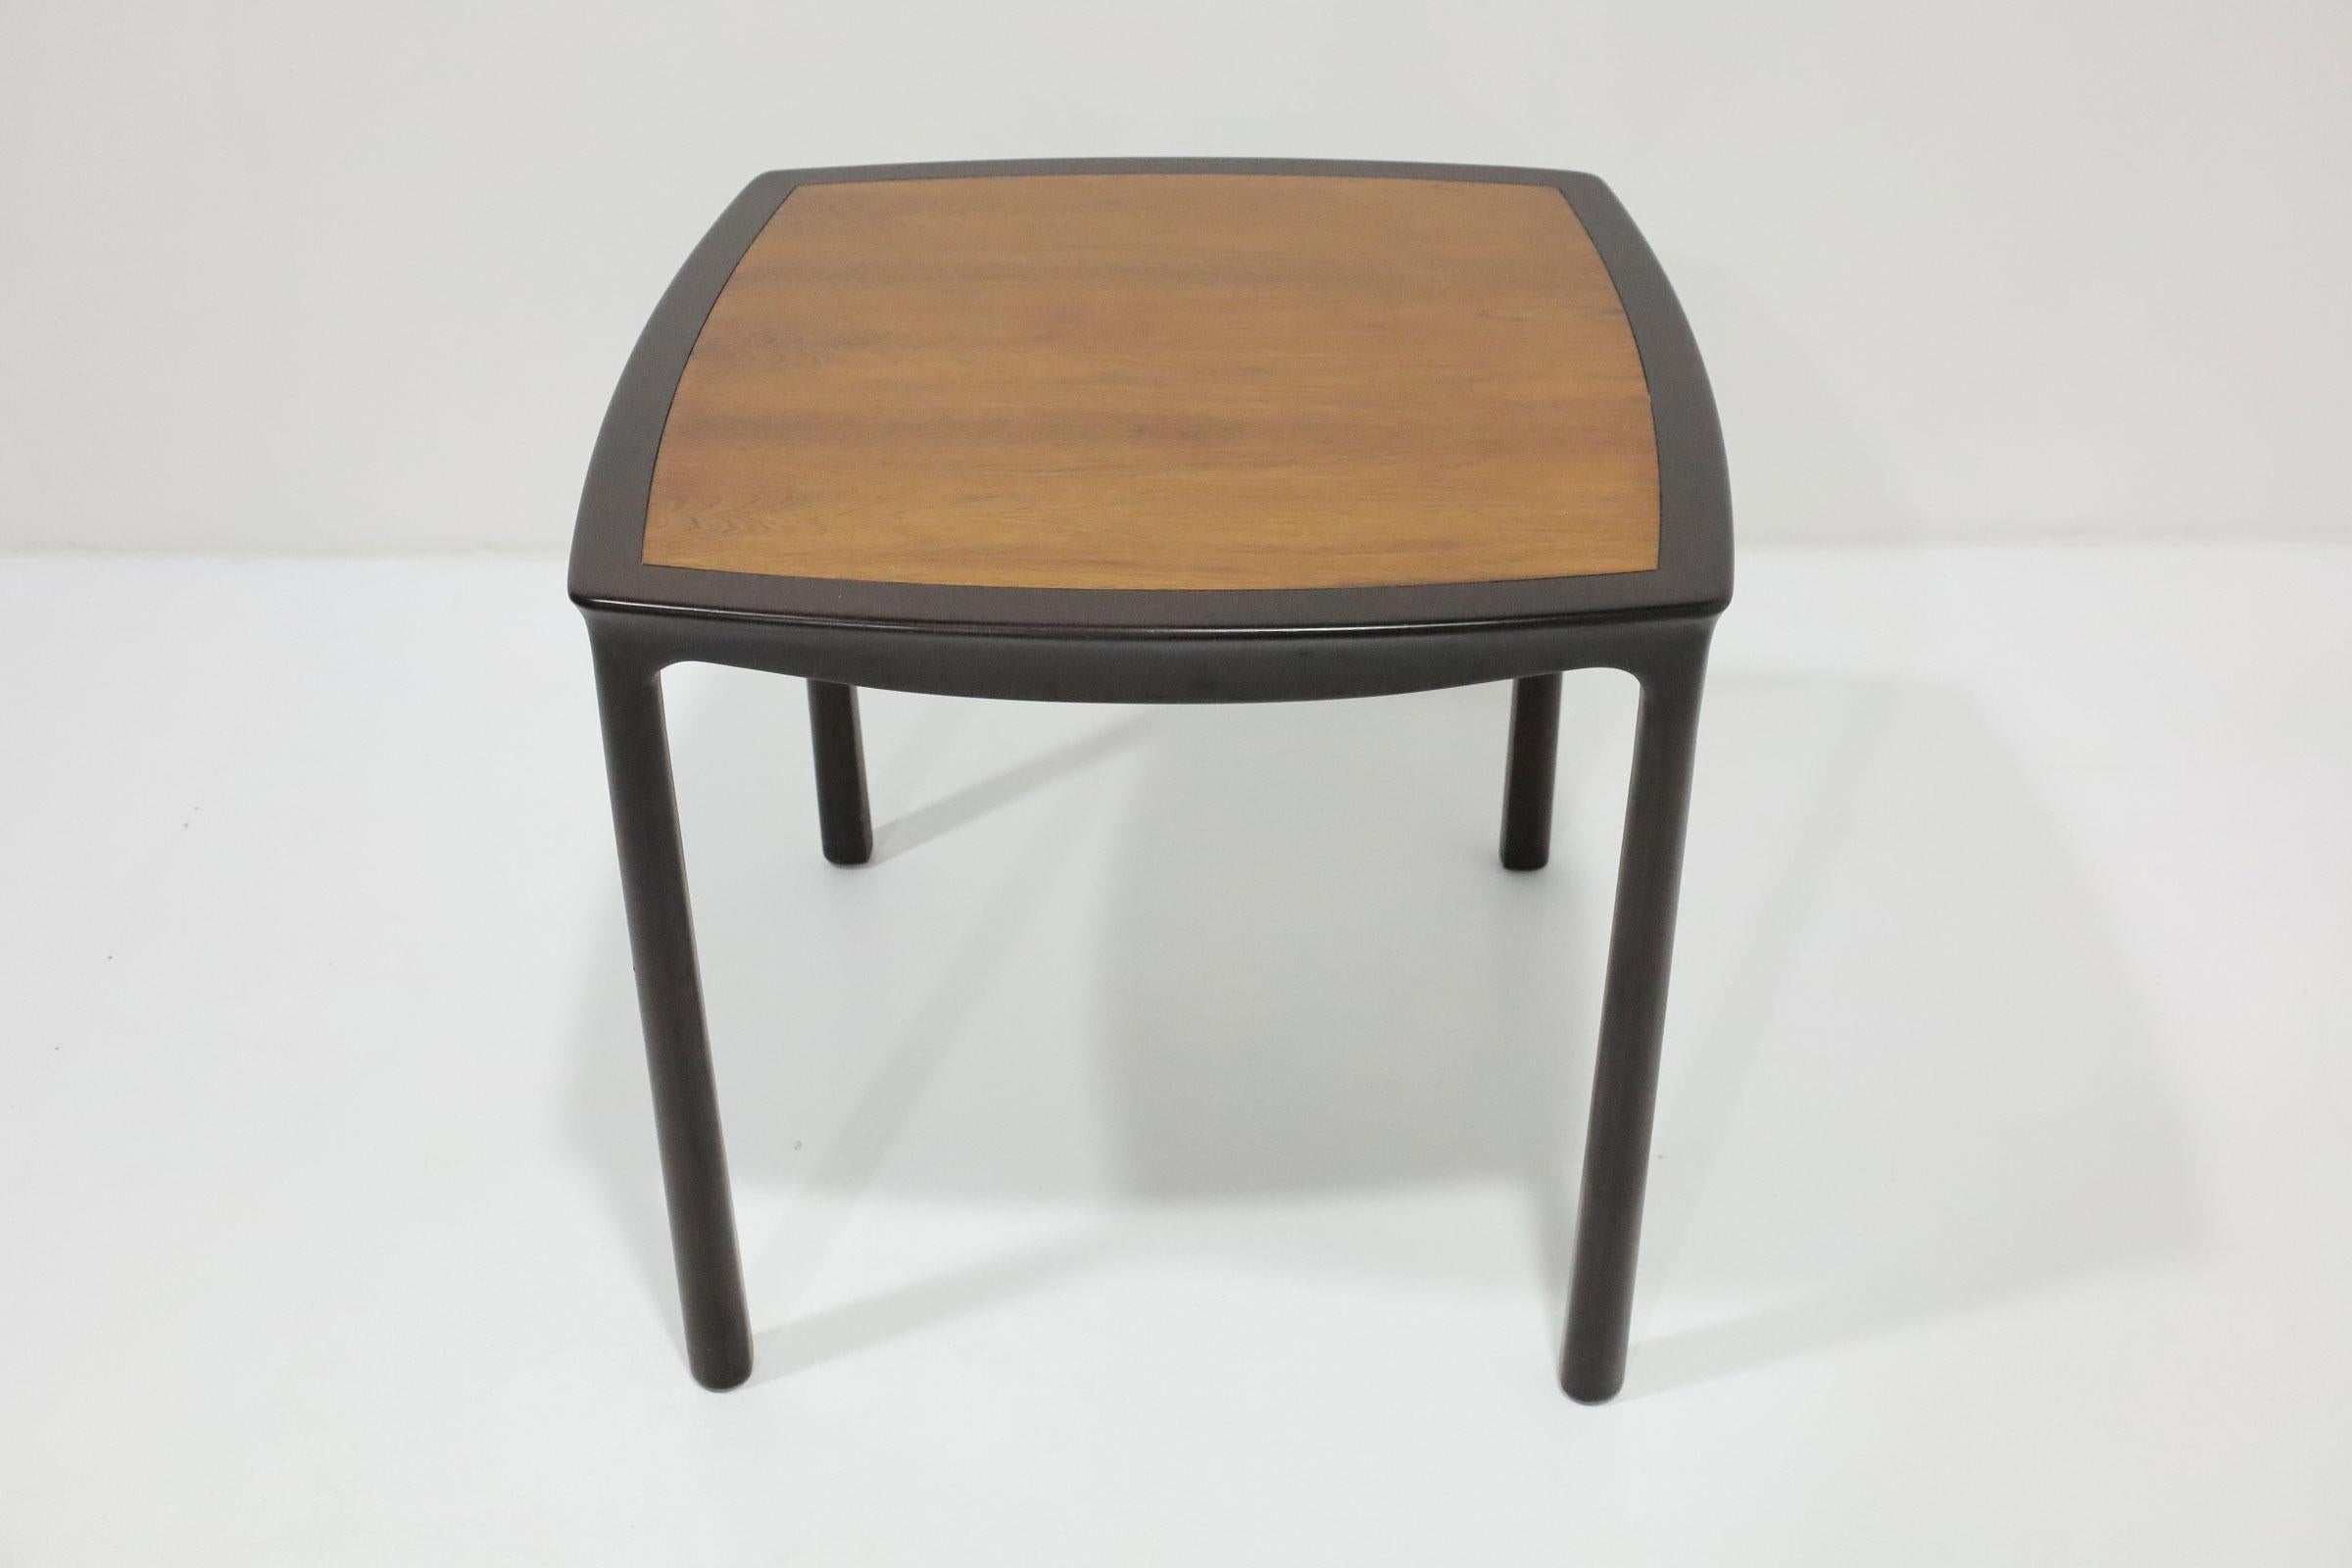 20th Century Edward Wormley Game Table in Mahogany with Rosewood Top 1960s 'Signed' For Sale